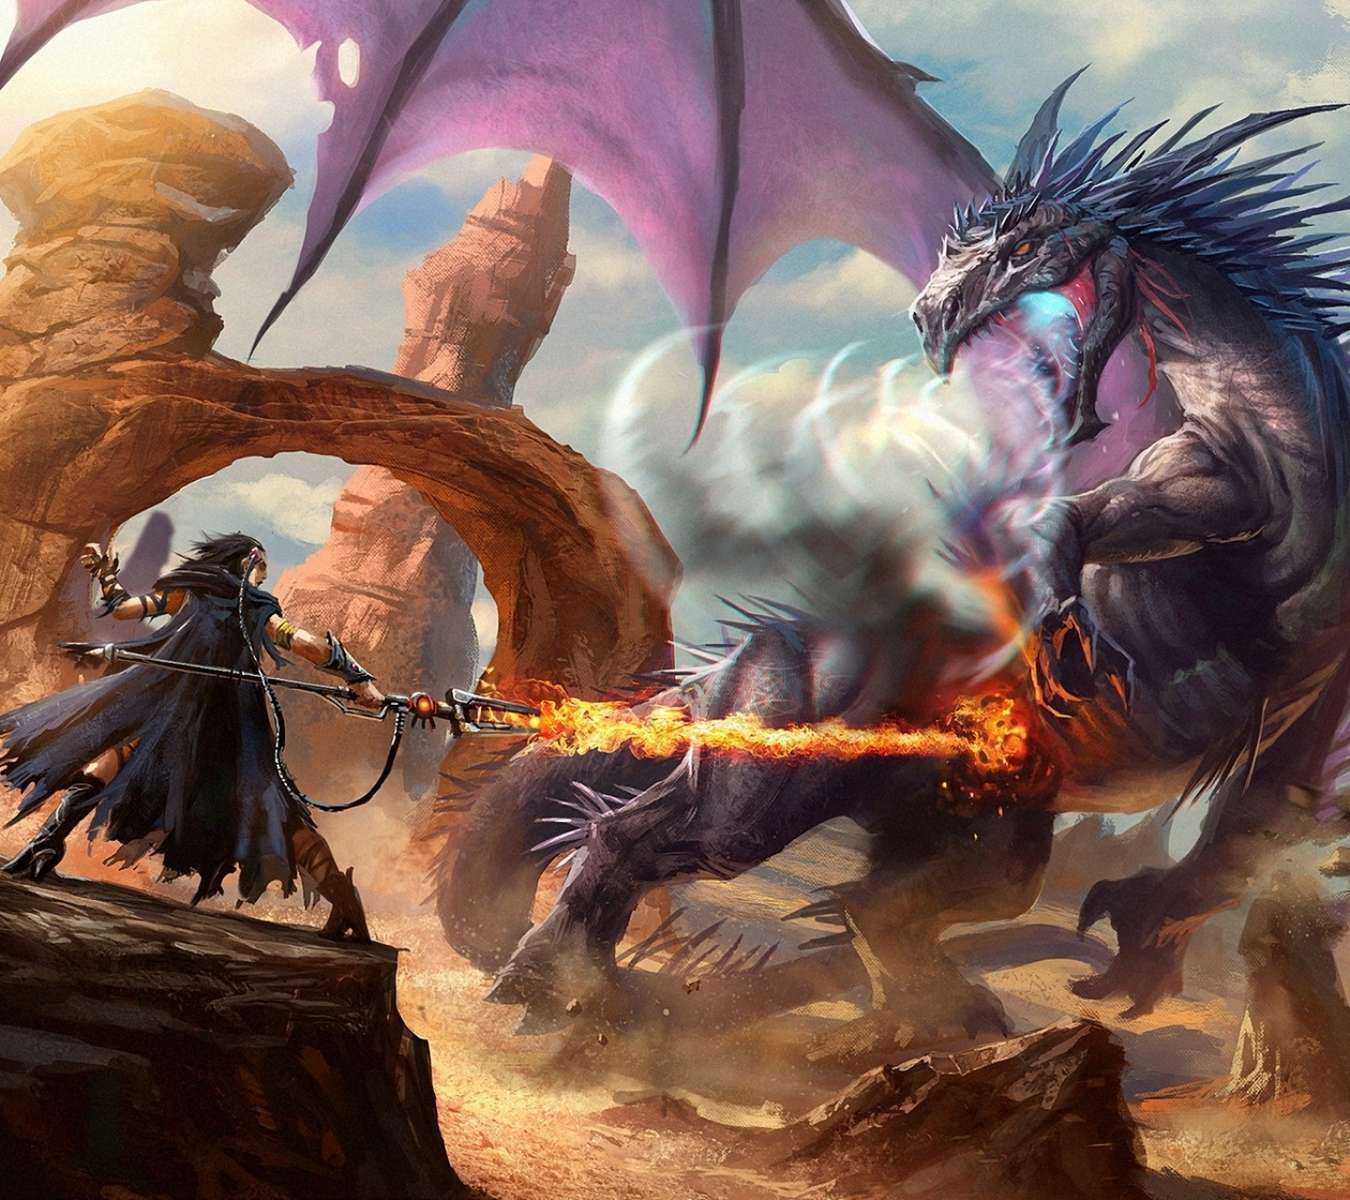 Wizard dragon fight puzzle online from photo